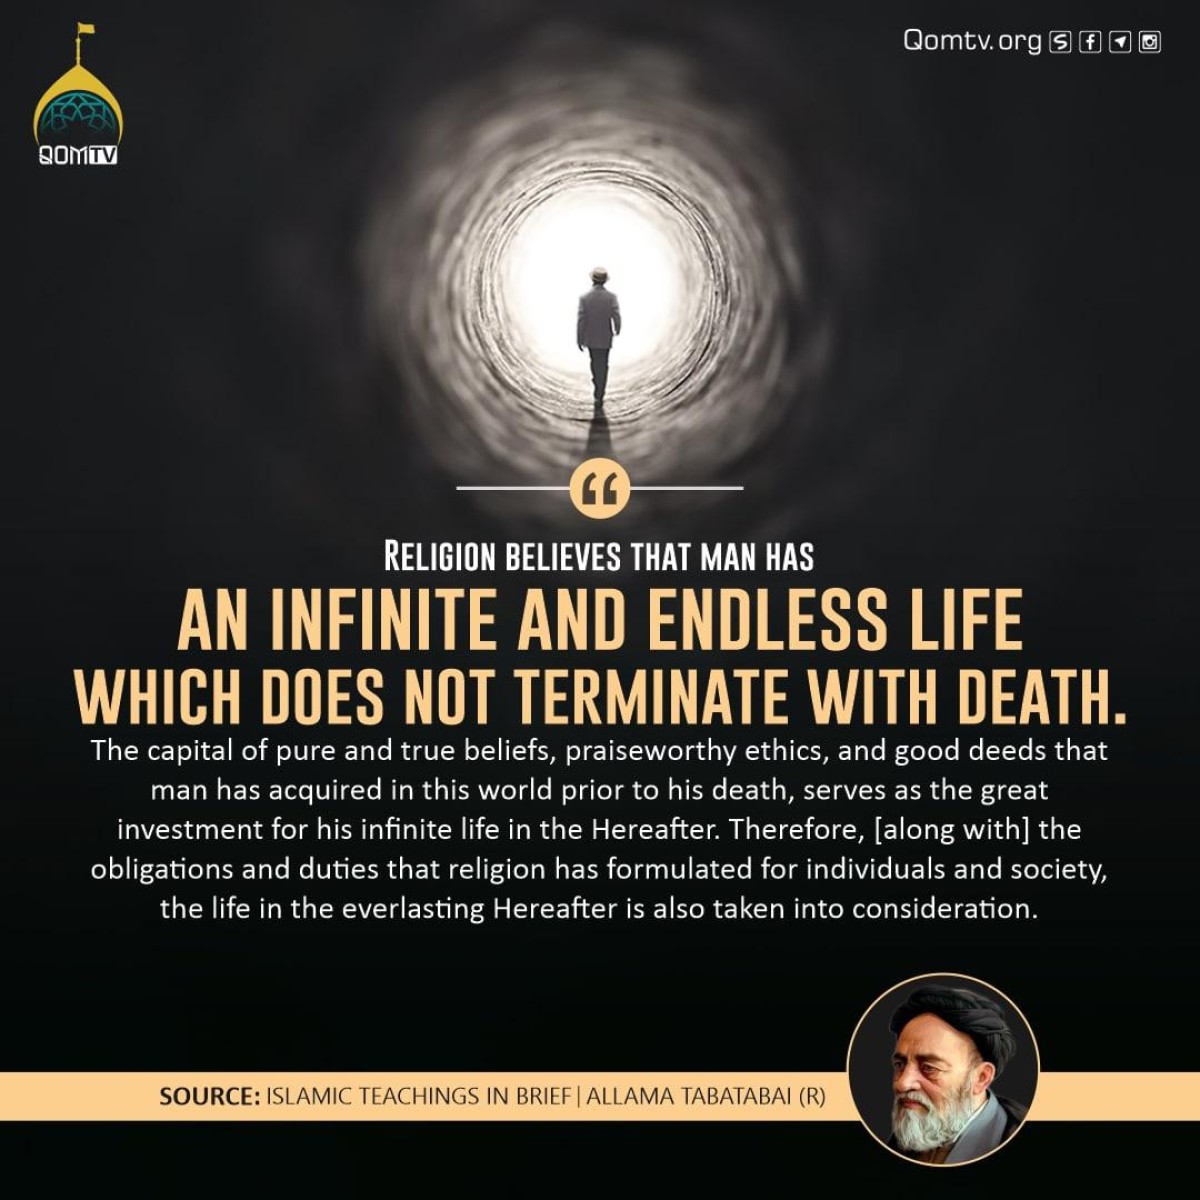 Religion believes that man has an infinite and endless life which does not terminate with death